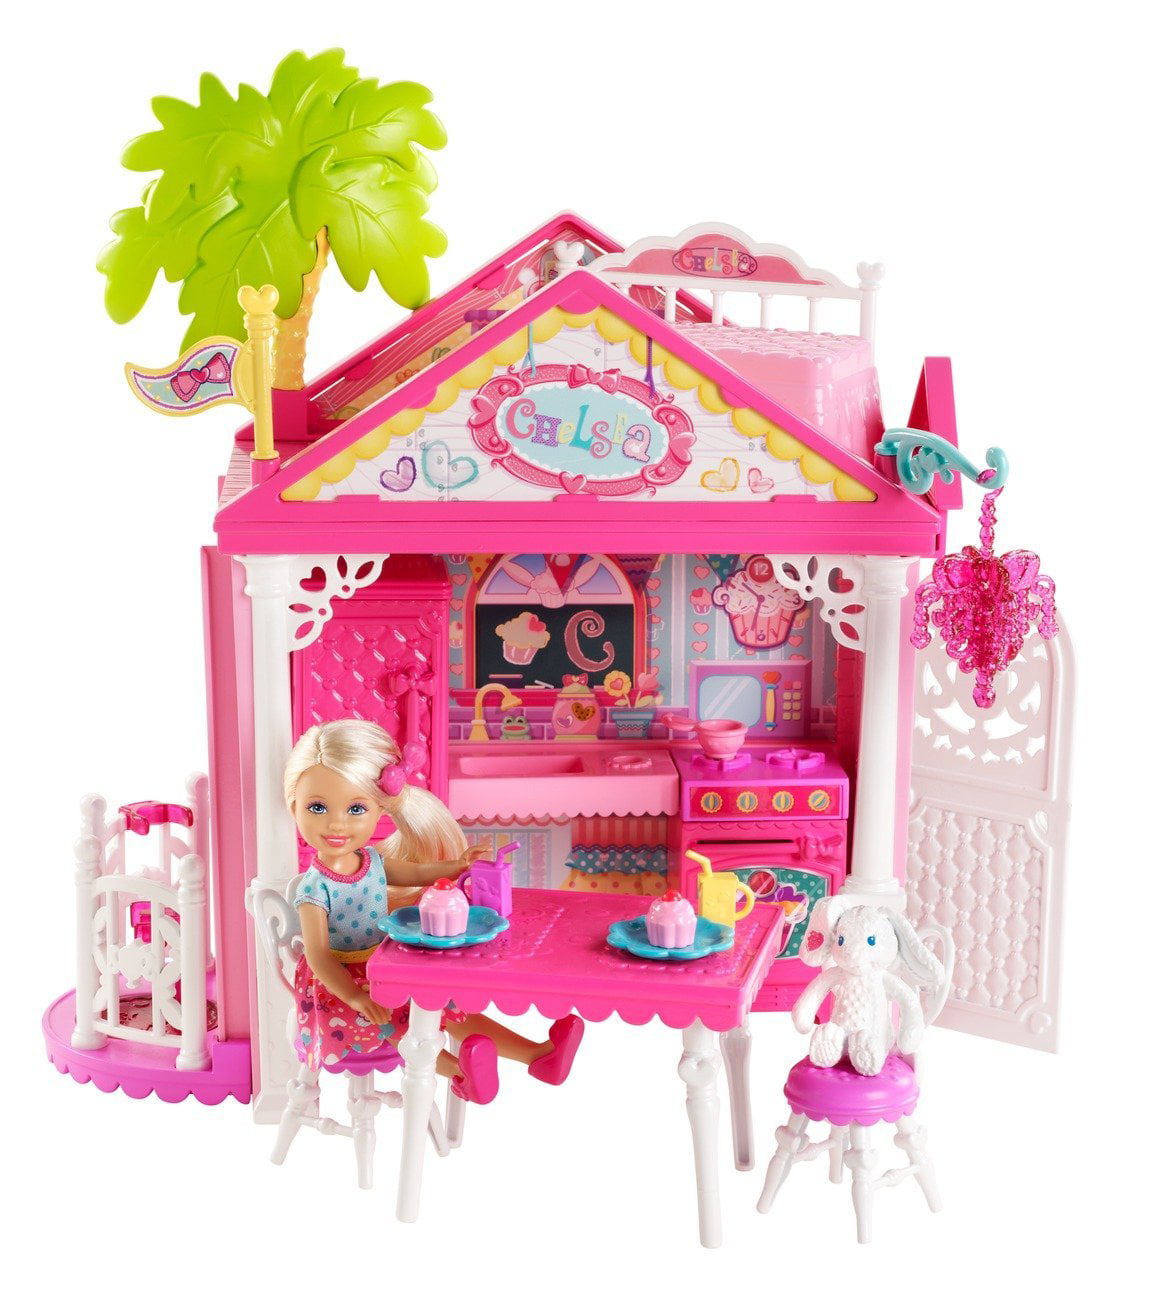 Barbie Chelsea Doll and Clubhouse Playset for sale online